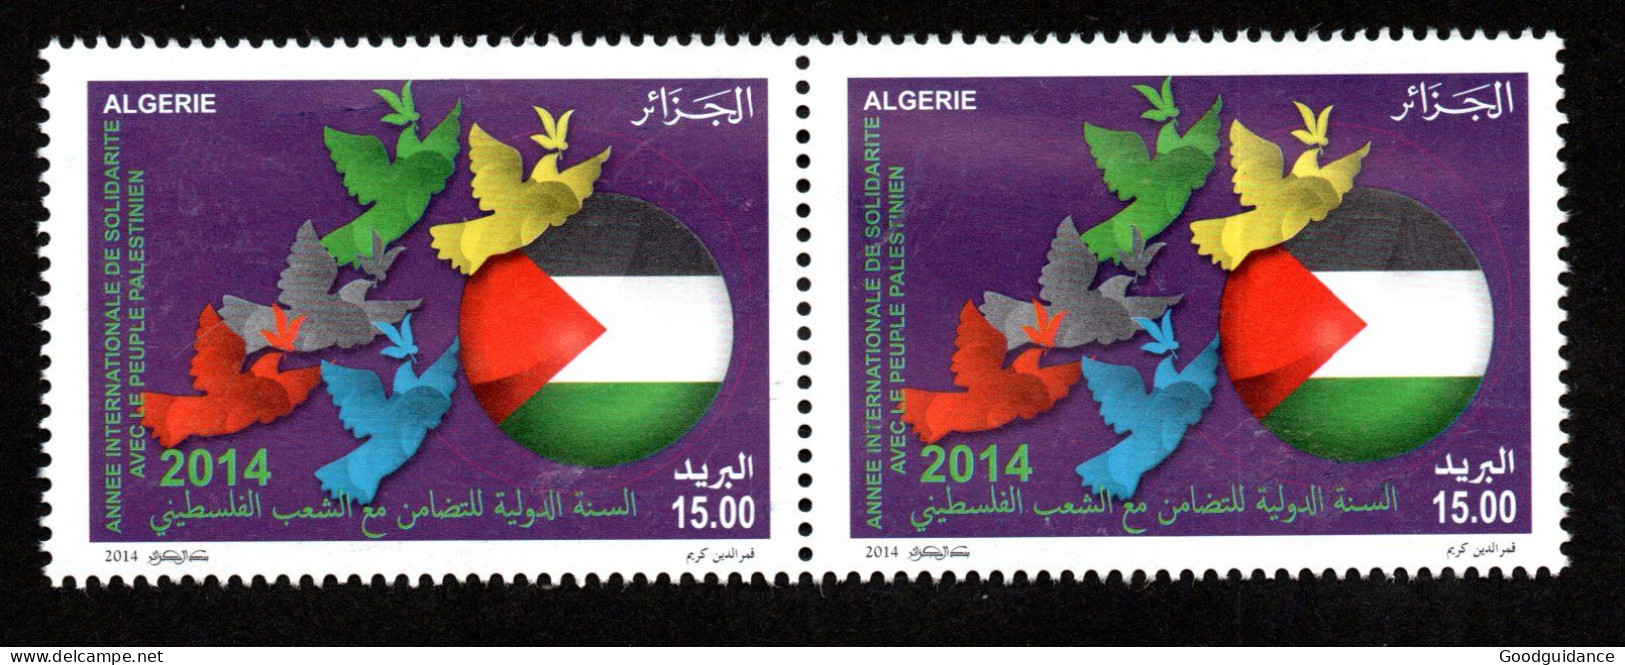 2014- Algeria- International Year Of Solidarity With The Palestinian People - Flag - Dove - Pair - Complete Set 1v.MNH** - Palestine